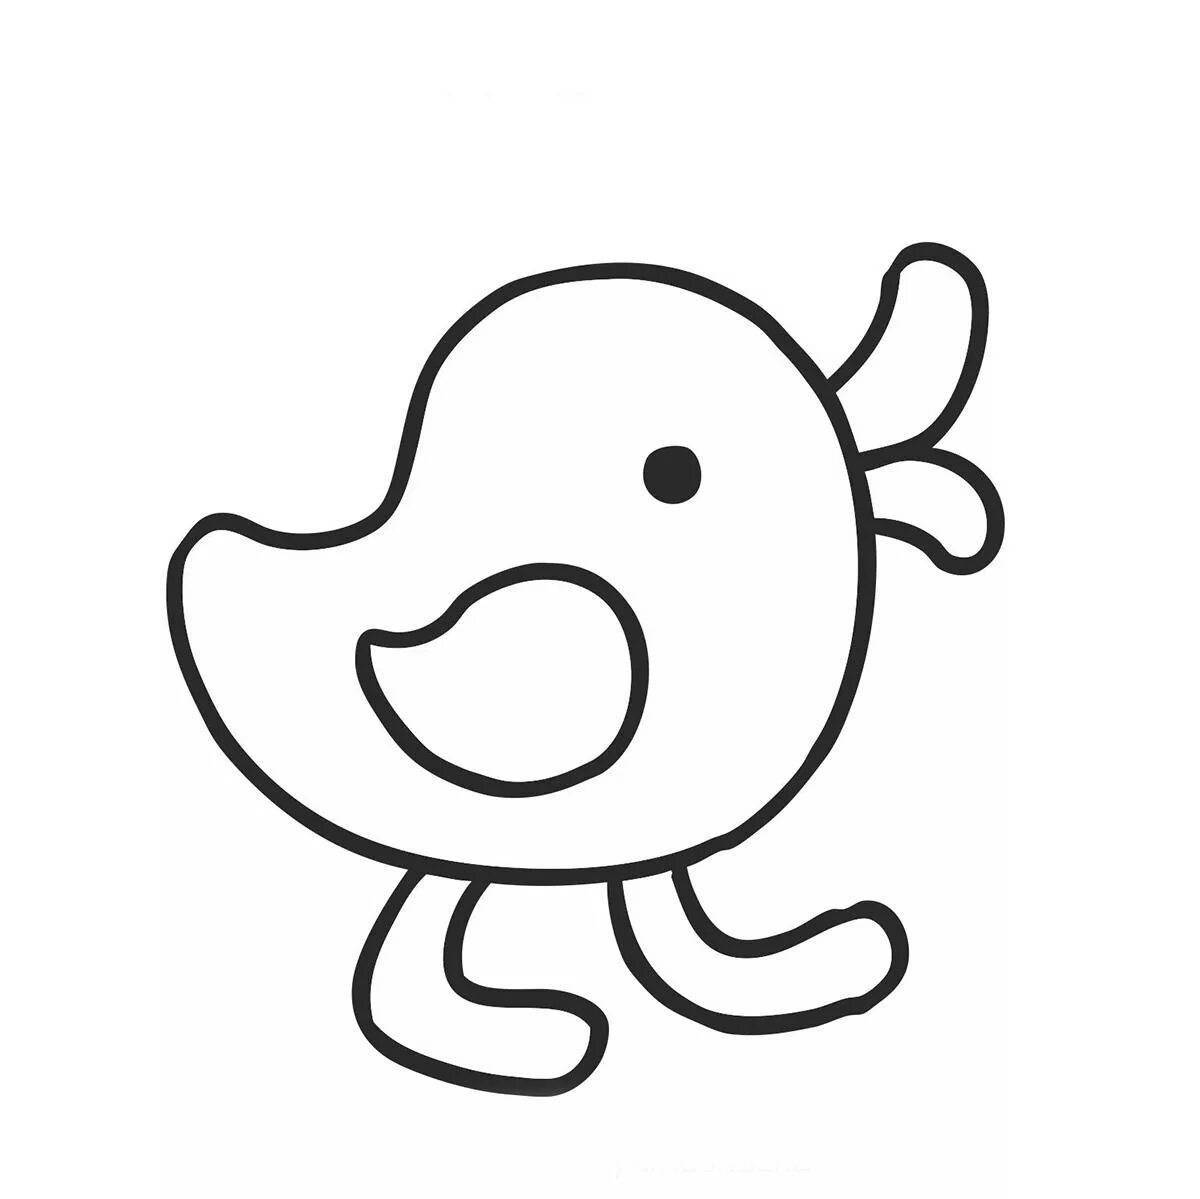 Duck coloring page